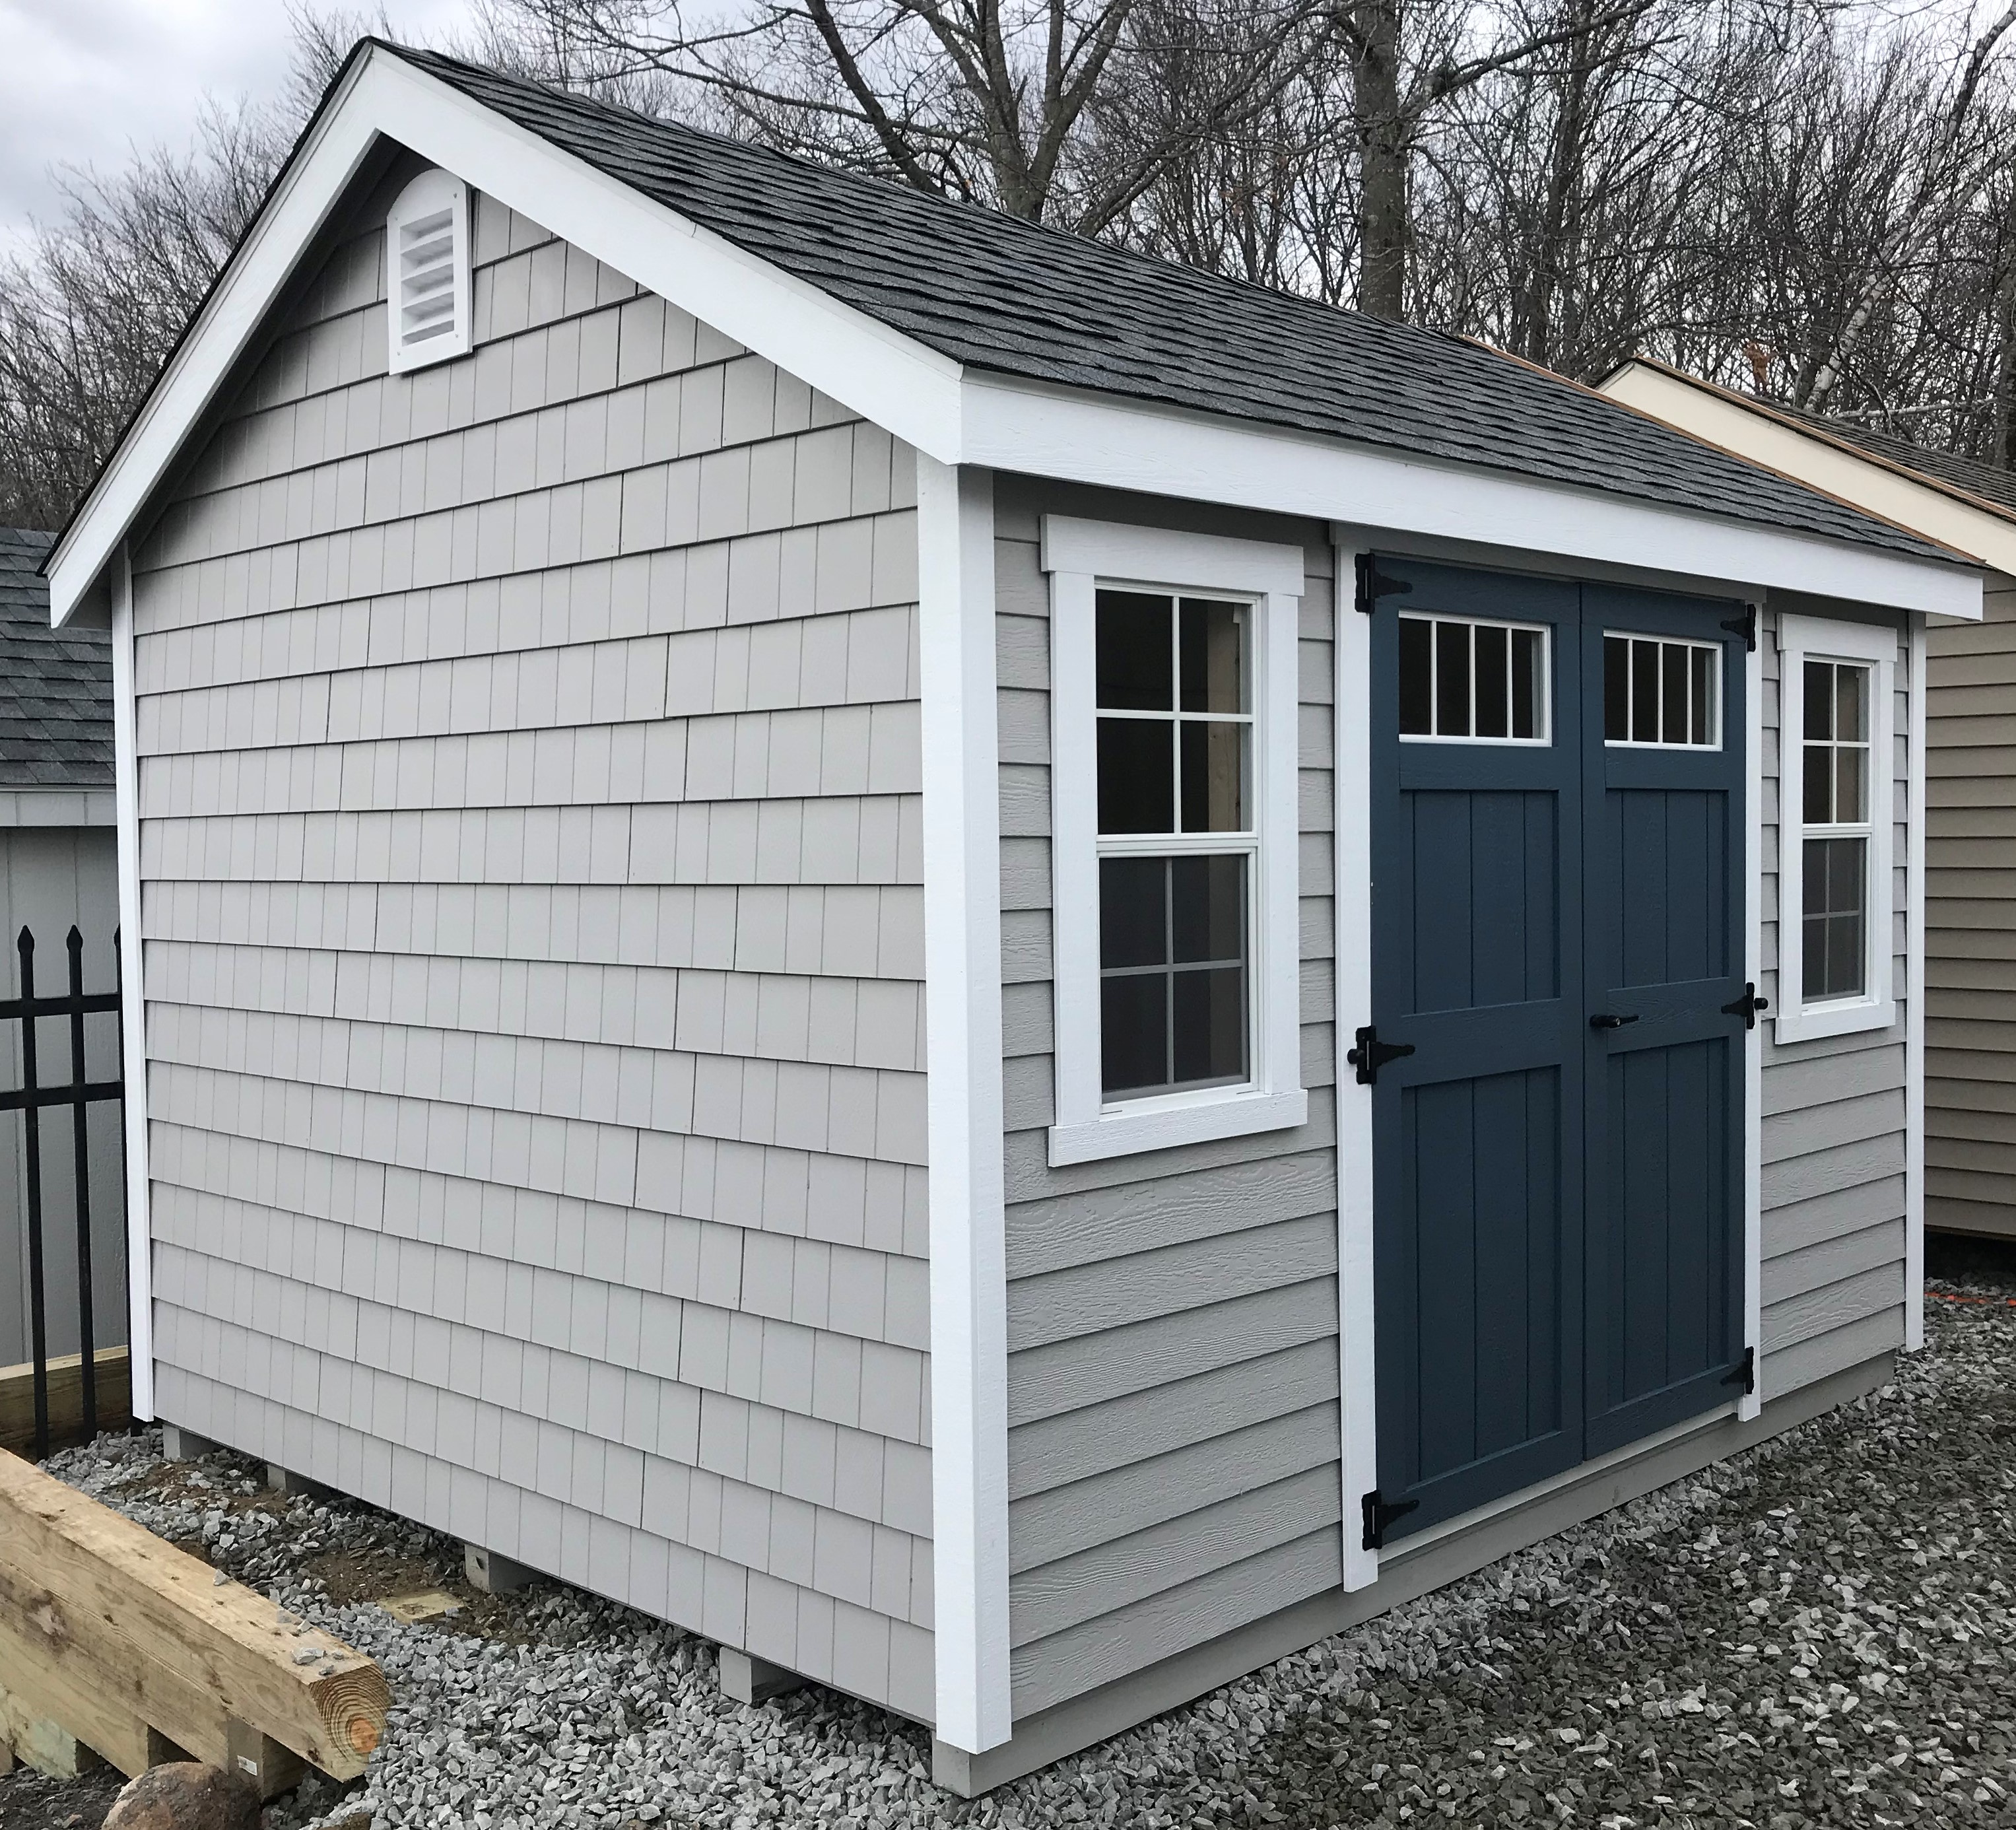 C3 - 10X12 Classic Cape shown in Smartside Painted Clapboard & Smartside Painted Cedar Shake Siding with (2) 18x36'' Windows